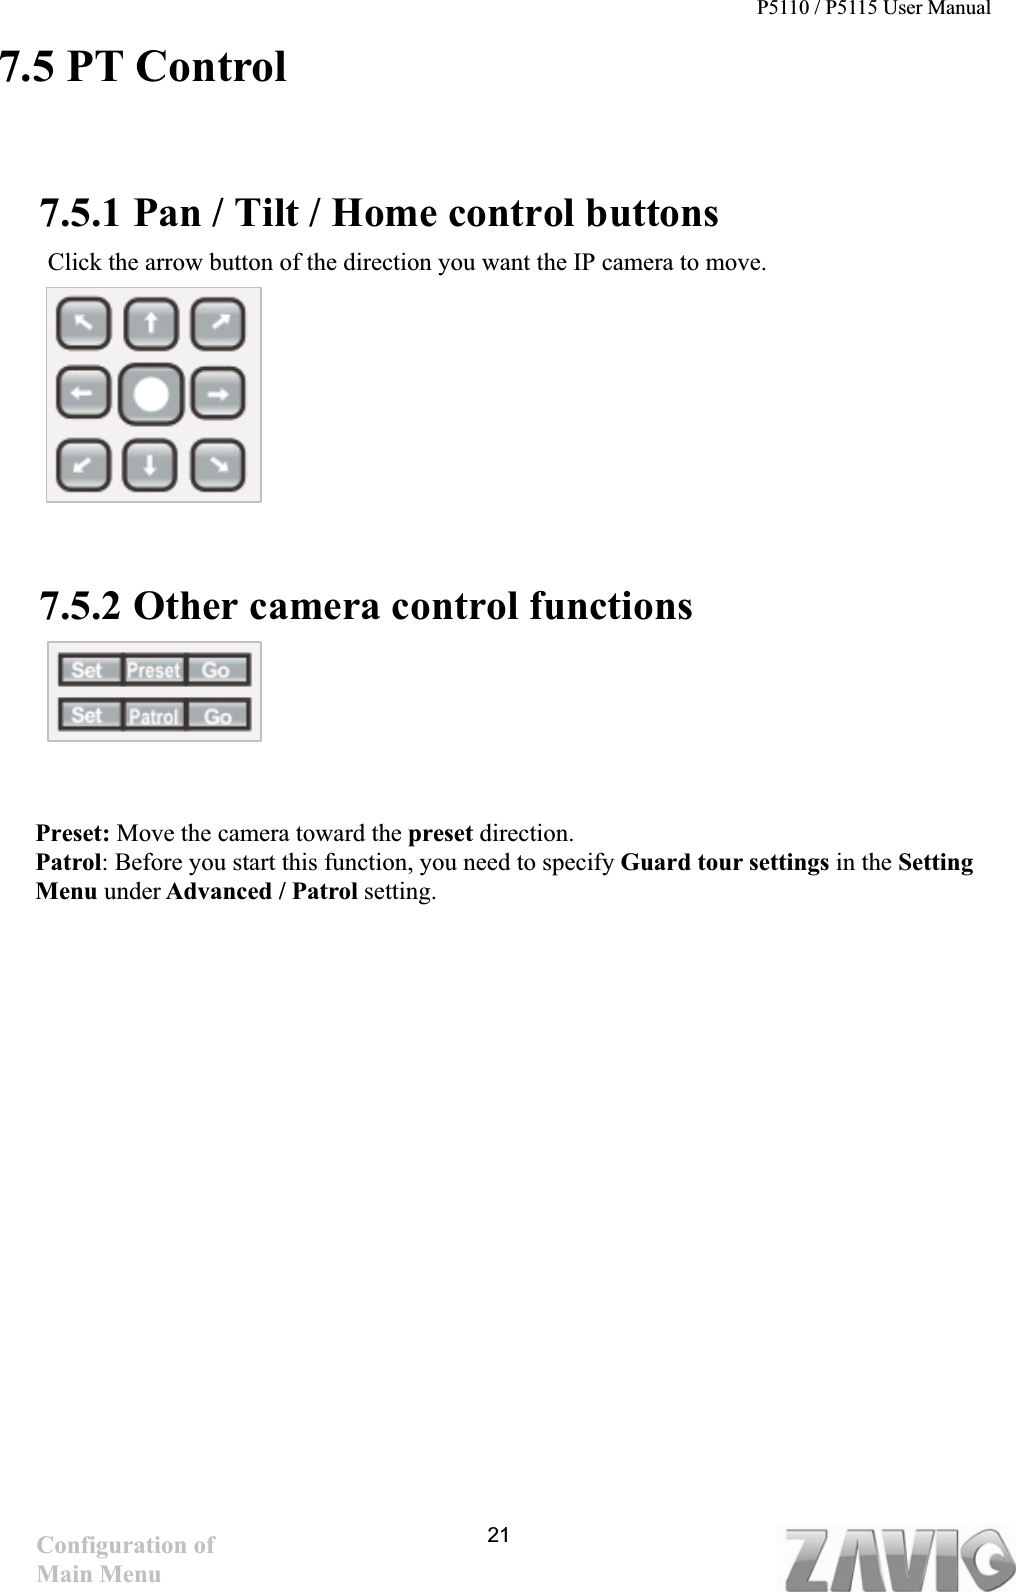 P5110 / P5115 User Manual   217.5 PT Control     7.5.1 Pan / Tilt / Home control buttons Click the arrow button of the direction you want the IP camera to move.   7.5.2 Other camera control functions Preset: Move the camera toward the preset direction.Patrol: Before you start this function, you need to specify Guard tour settings in the SettingMenu under Advanced / Patrol setting.Configuration of Main Menu 